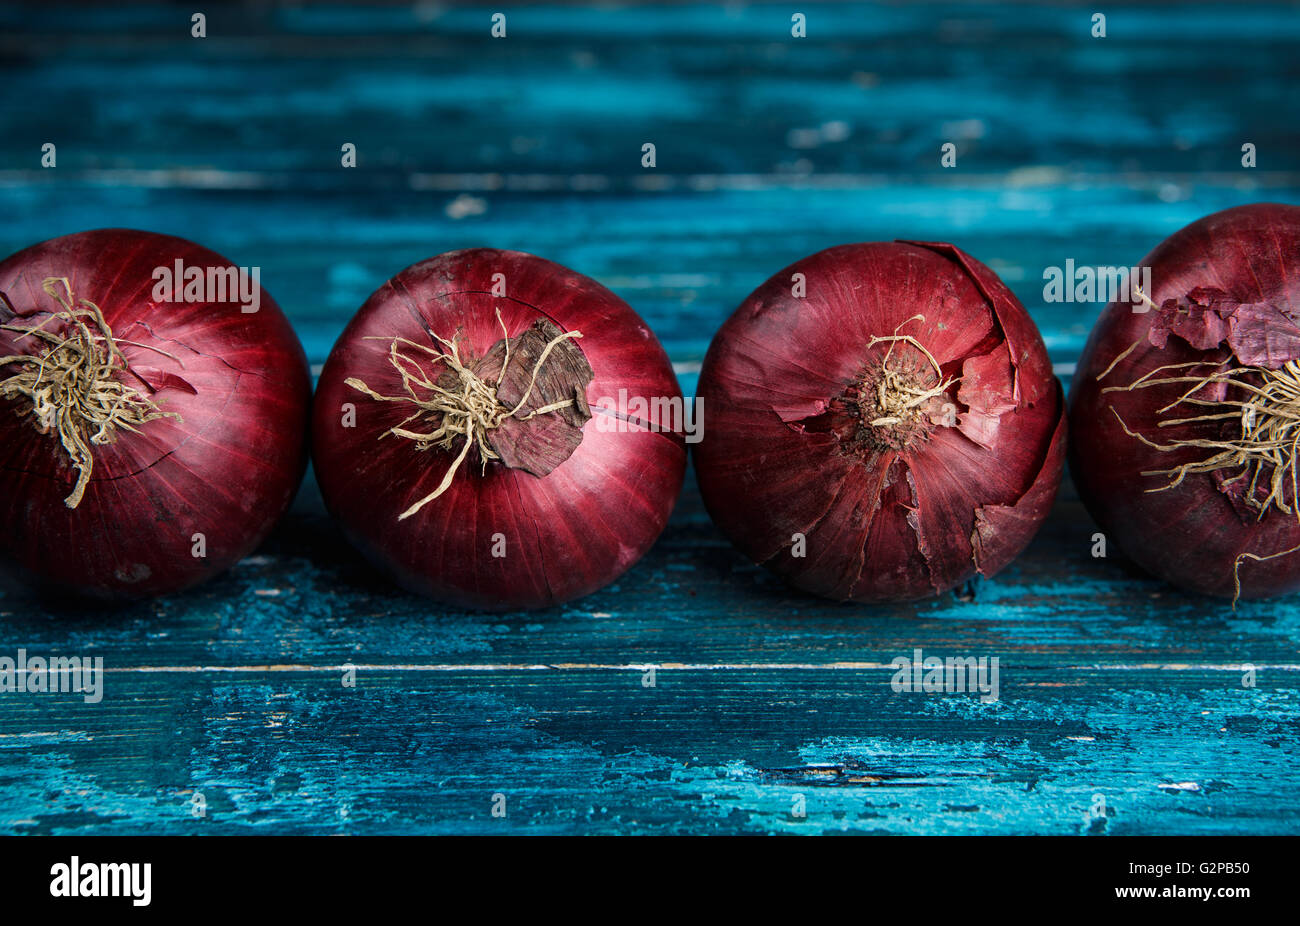 Whole Red Onions on Cyan Blue Wooden Board Stock Photo